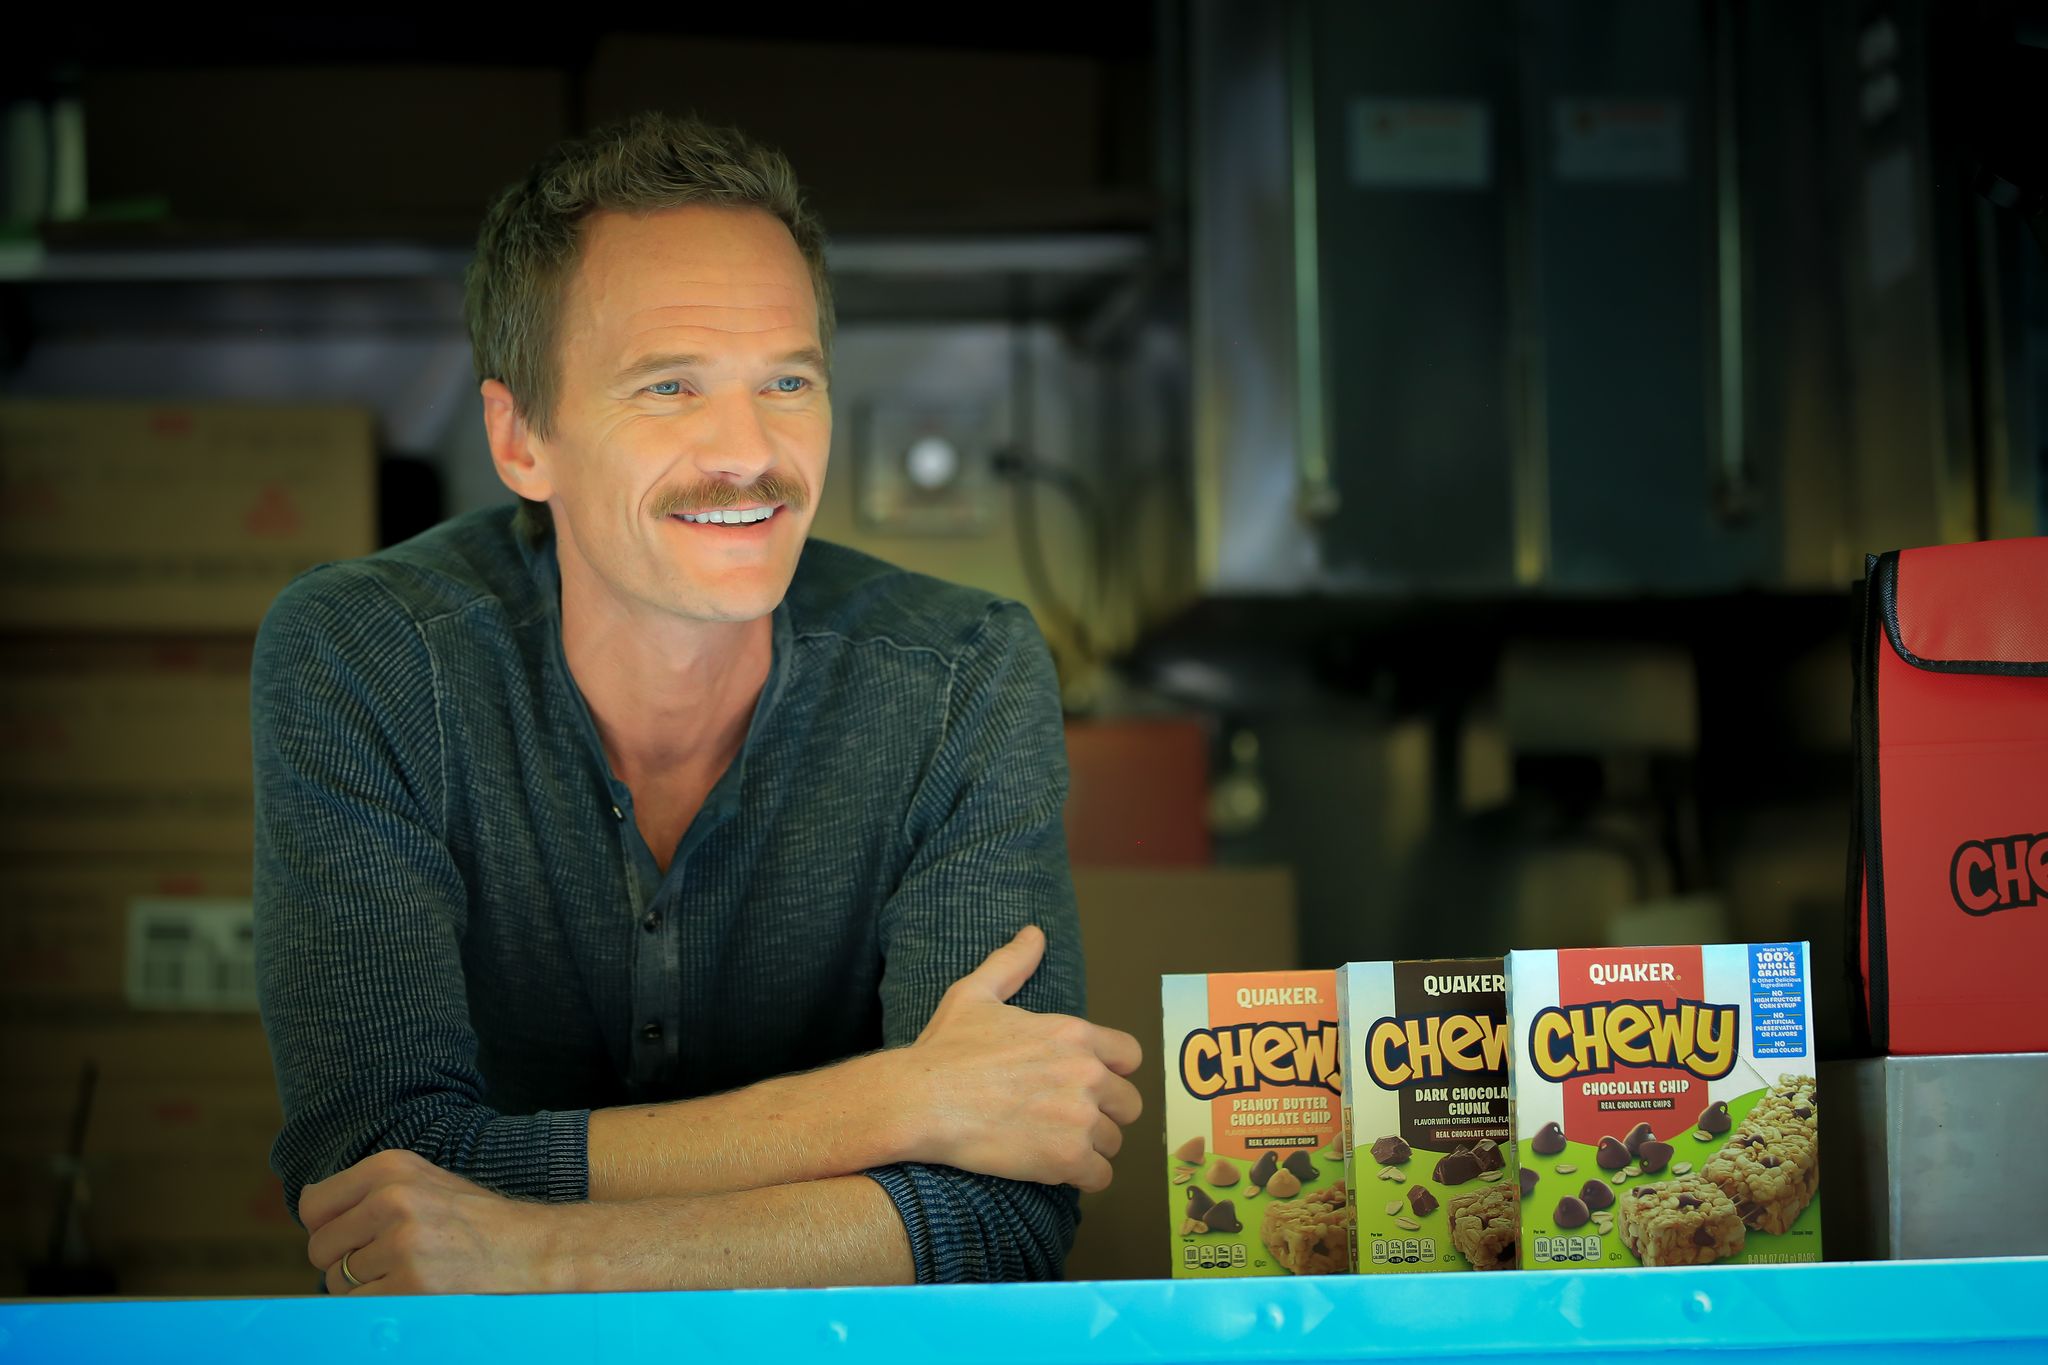 Neil Patrick Harris at Chewy promotion.